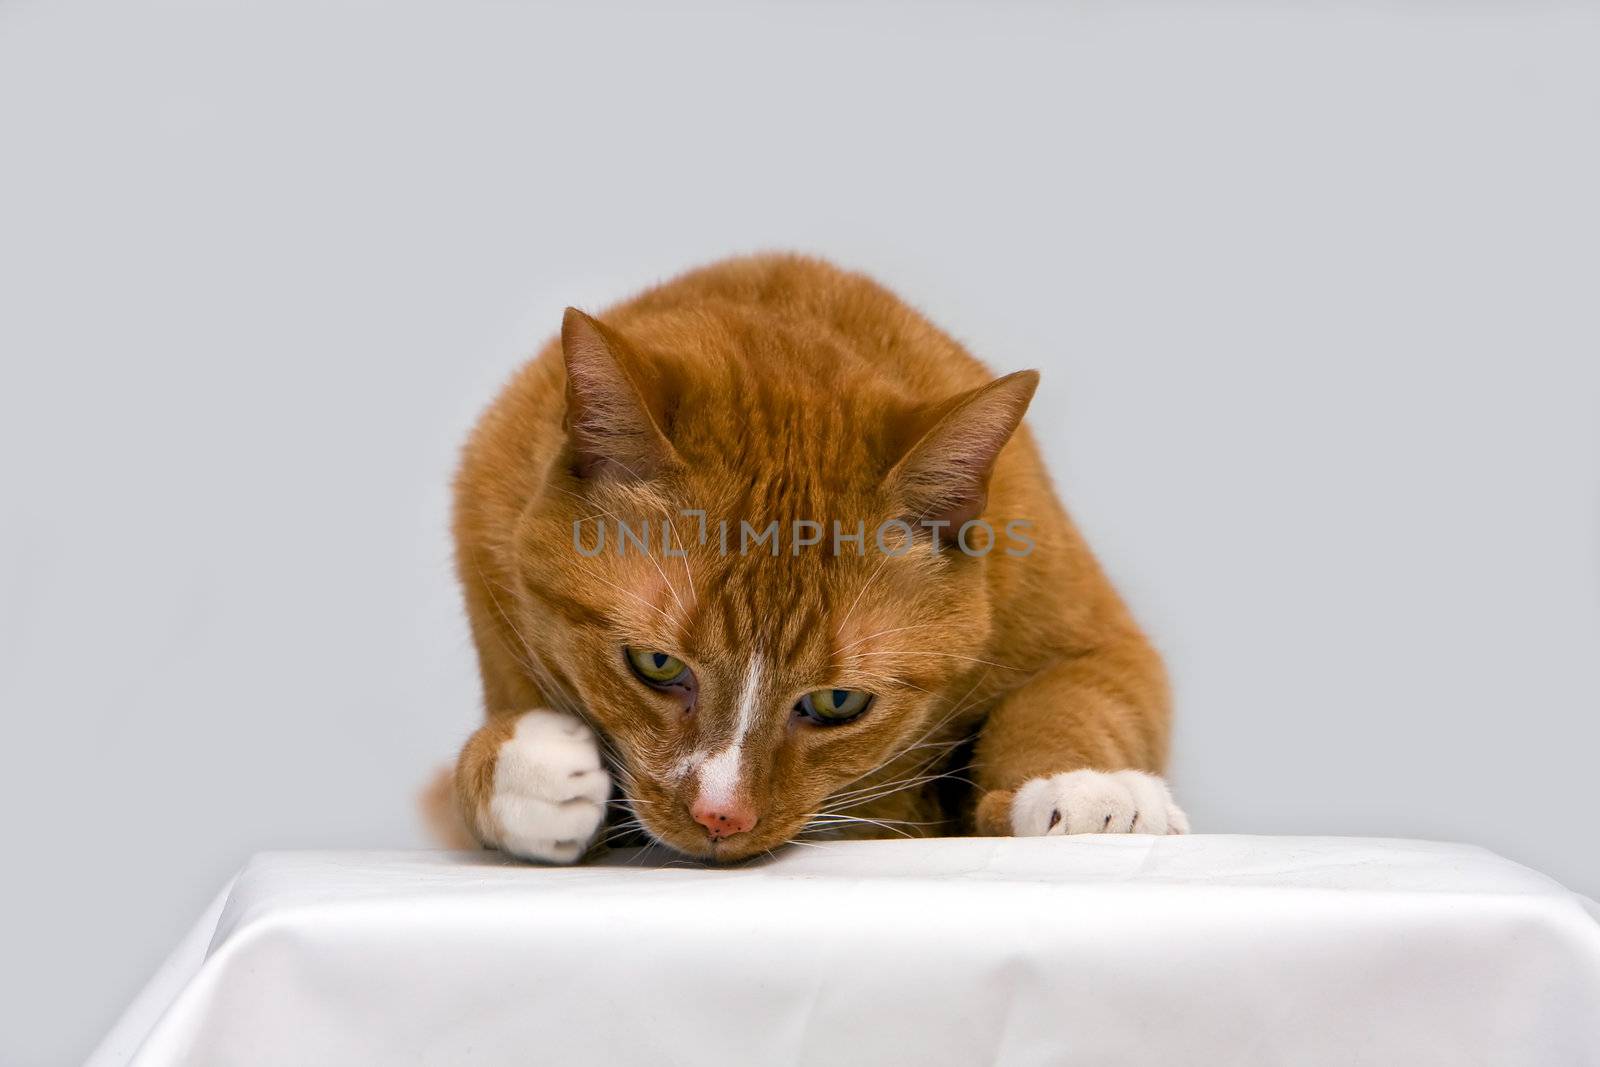 An orange cat curious to see what is underneath his paw, isolated on white